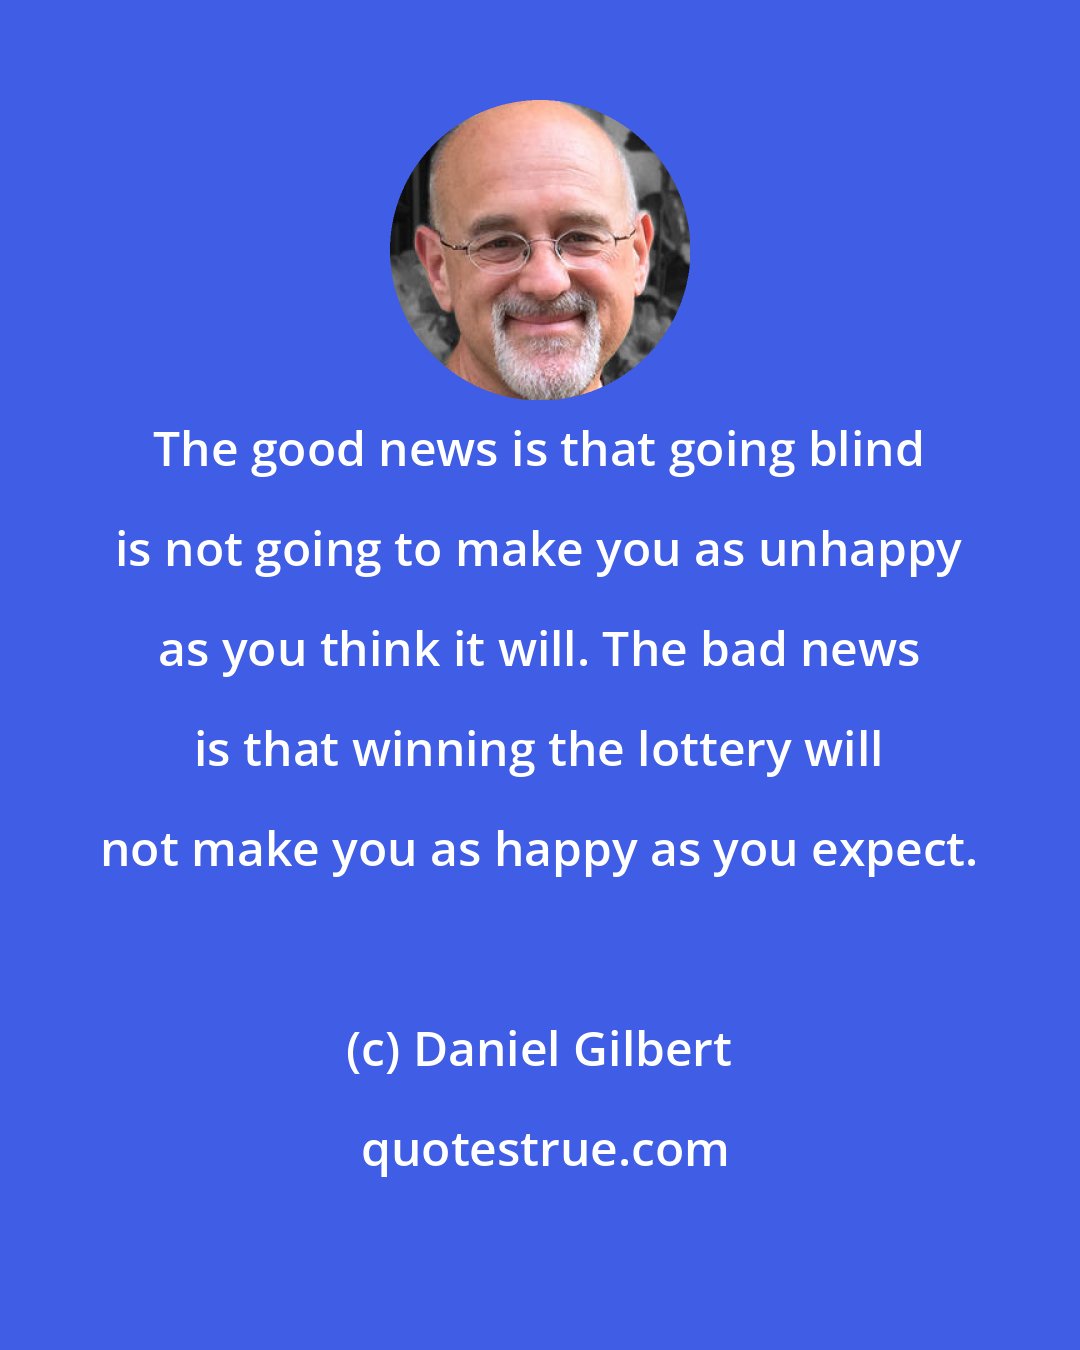 Daniel Gilbert: The good news is that going blind is not going to make you as unhappy as you think it will. The bad news is that winning the lottery will not make you as happy as you expect.